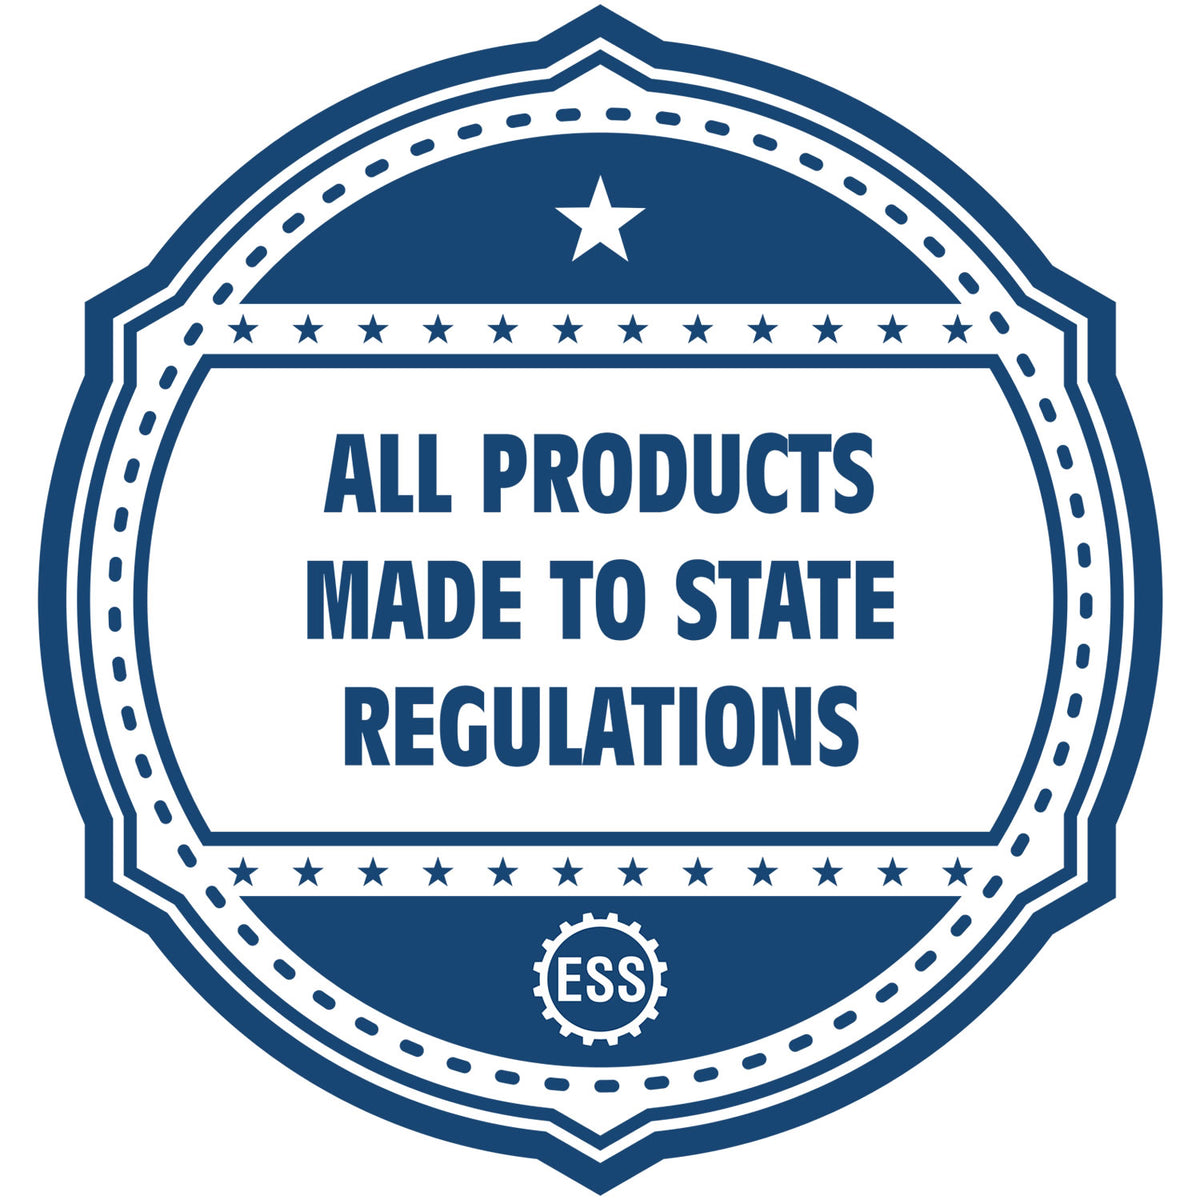 An icon or badge element for the Self-Inking District of Columbia Landscape Architect Stamp showing that this product is made in compliance with state regulations.